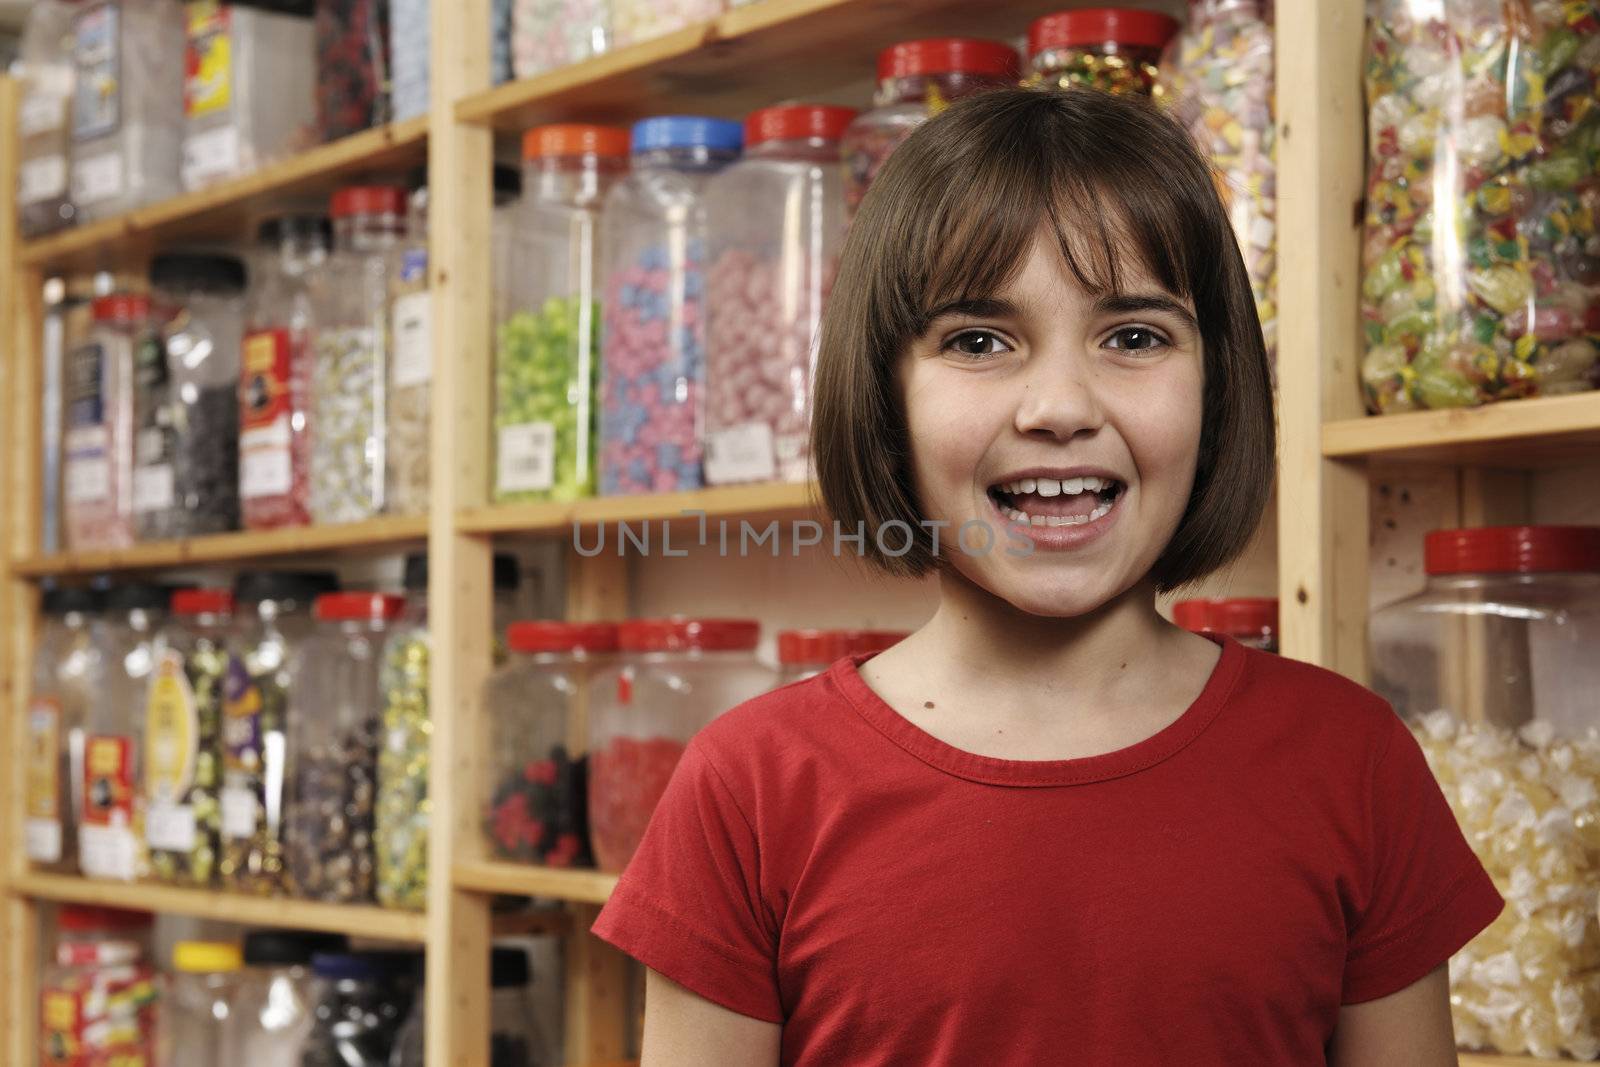 child in sweet shop by gemphotography